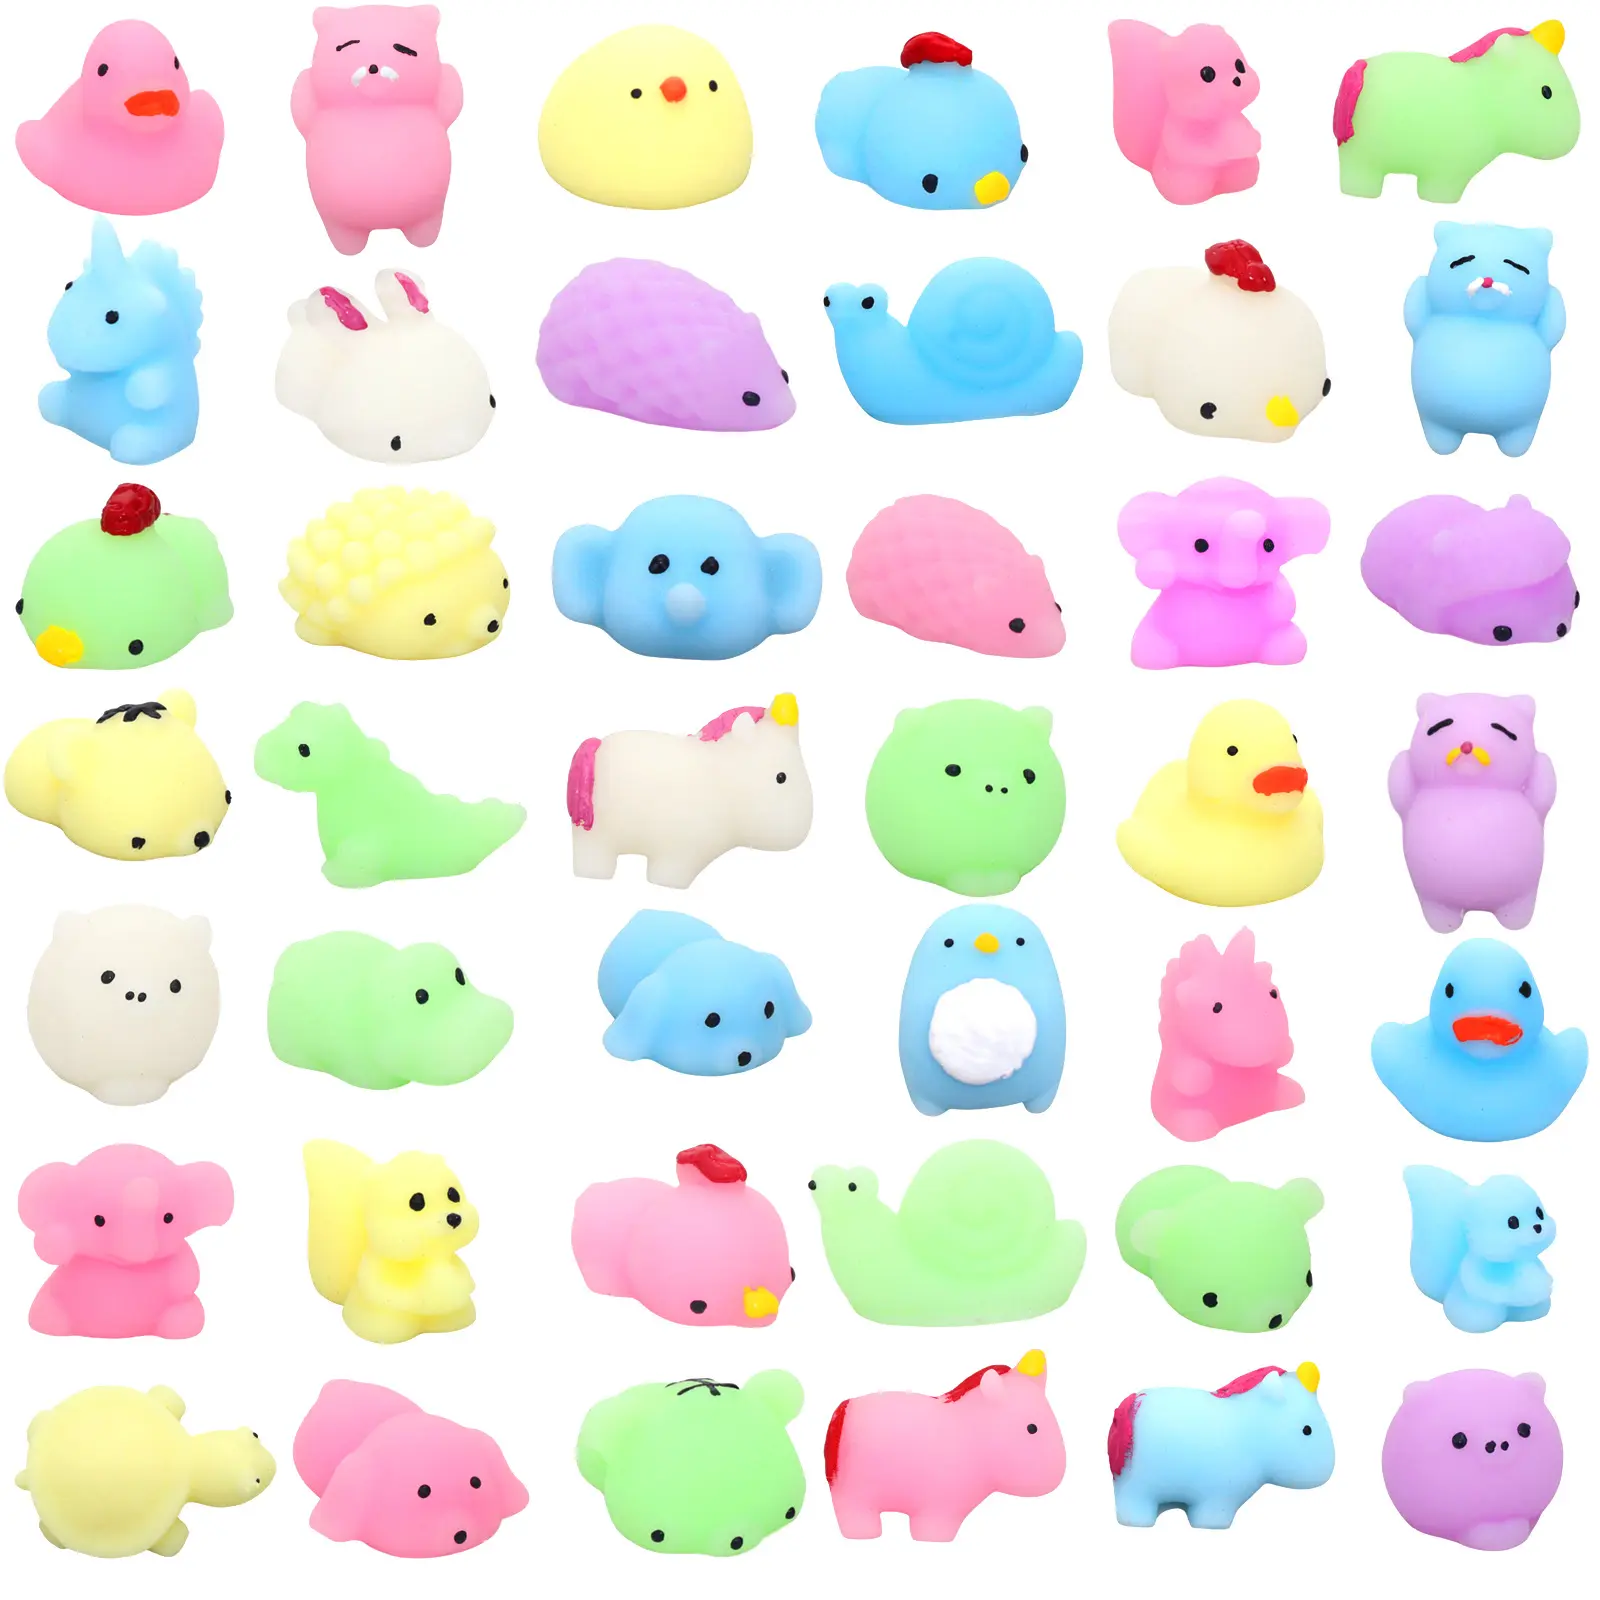 Novelty creative stress relievers Squeeze cute Nutty Soft Silicone pull pinch Squishy venting Mini Animal Decompression toys